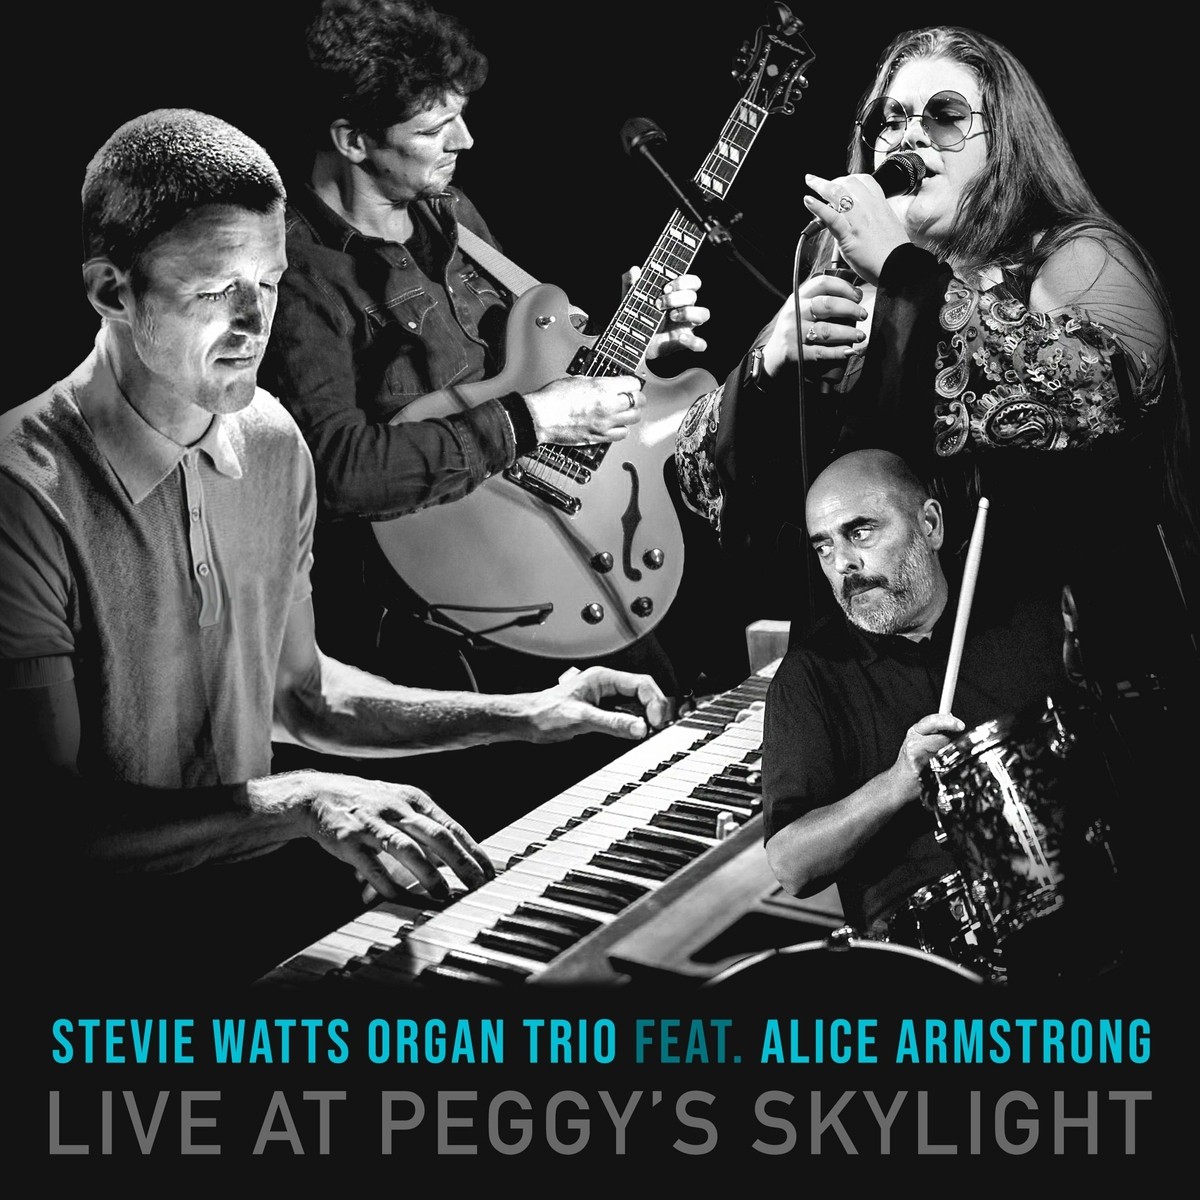 Stevie Watts Organ Trio - Live At Opeggy’s Skylight